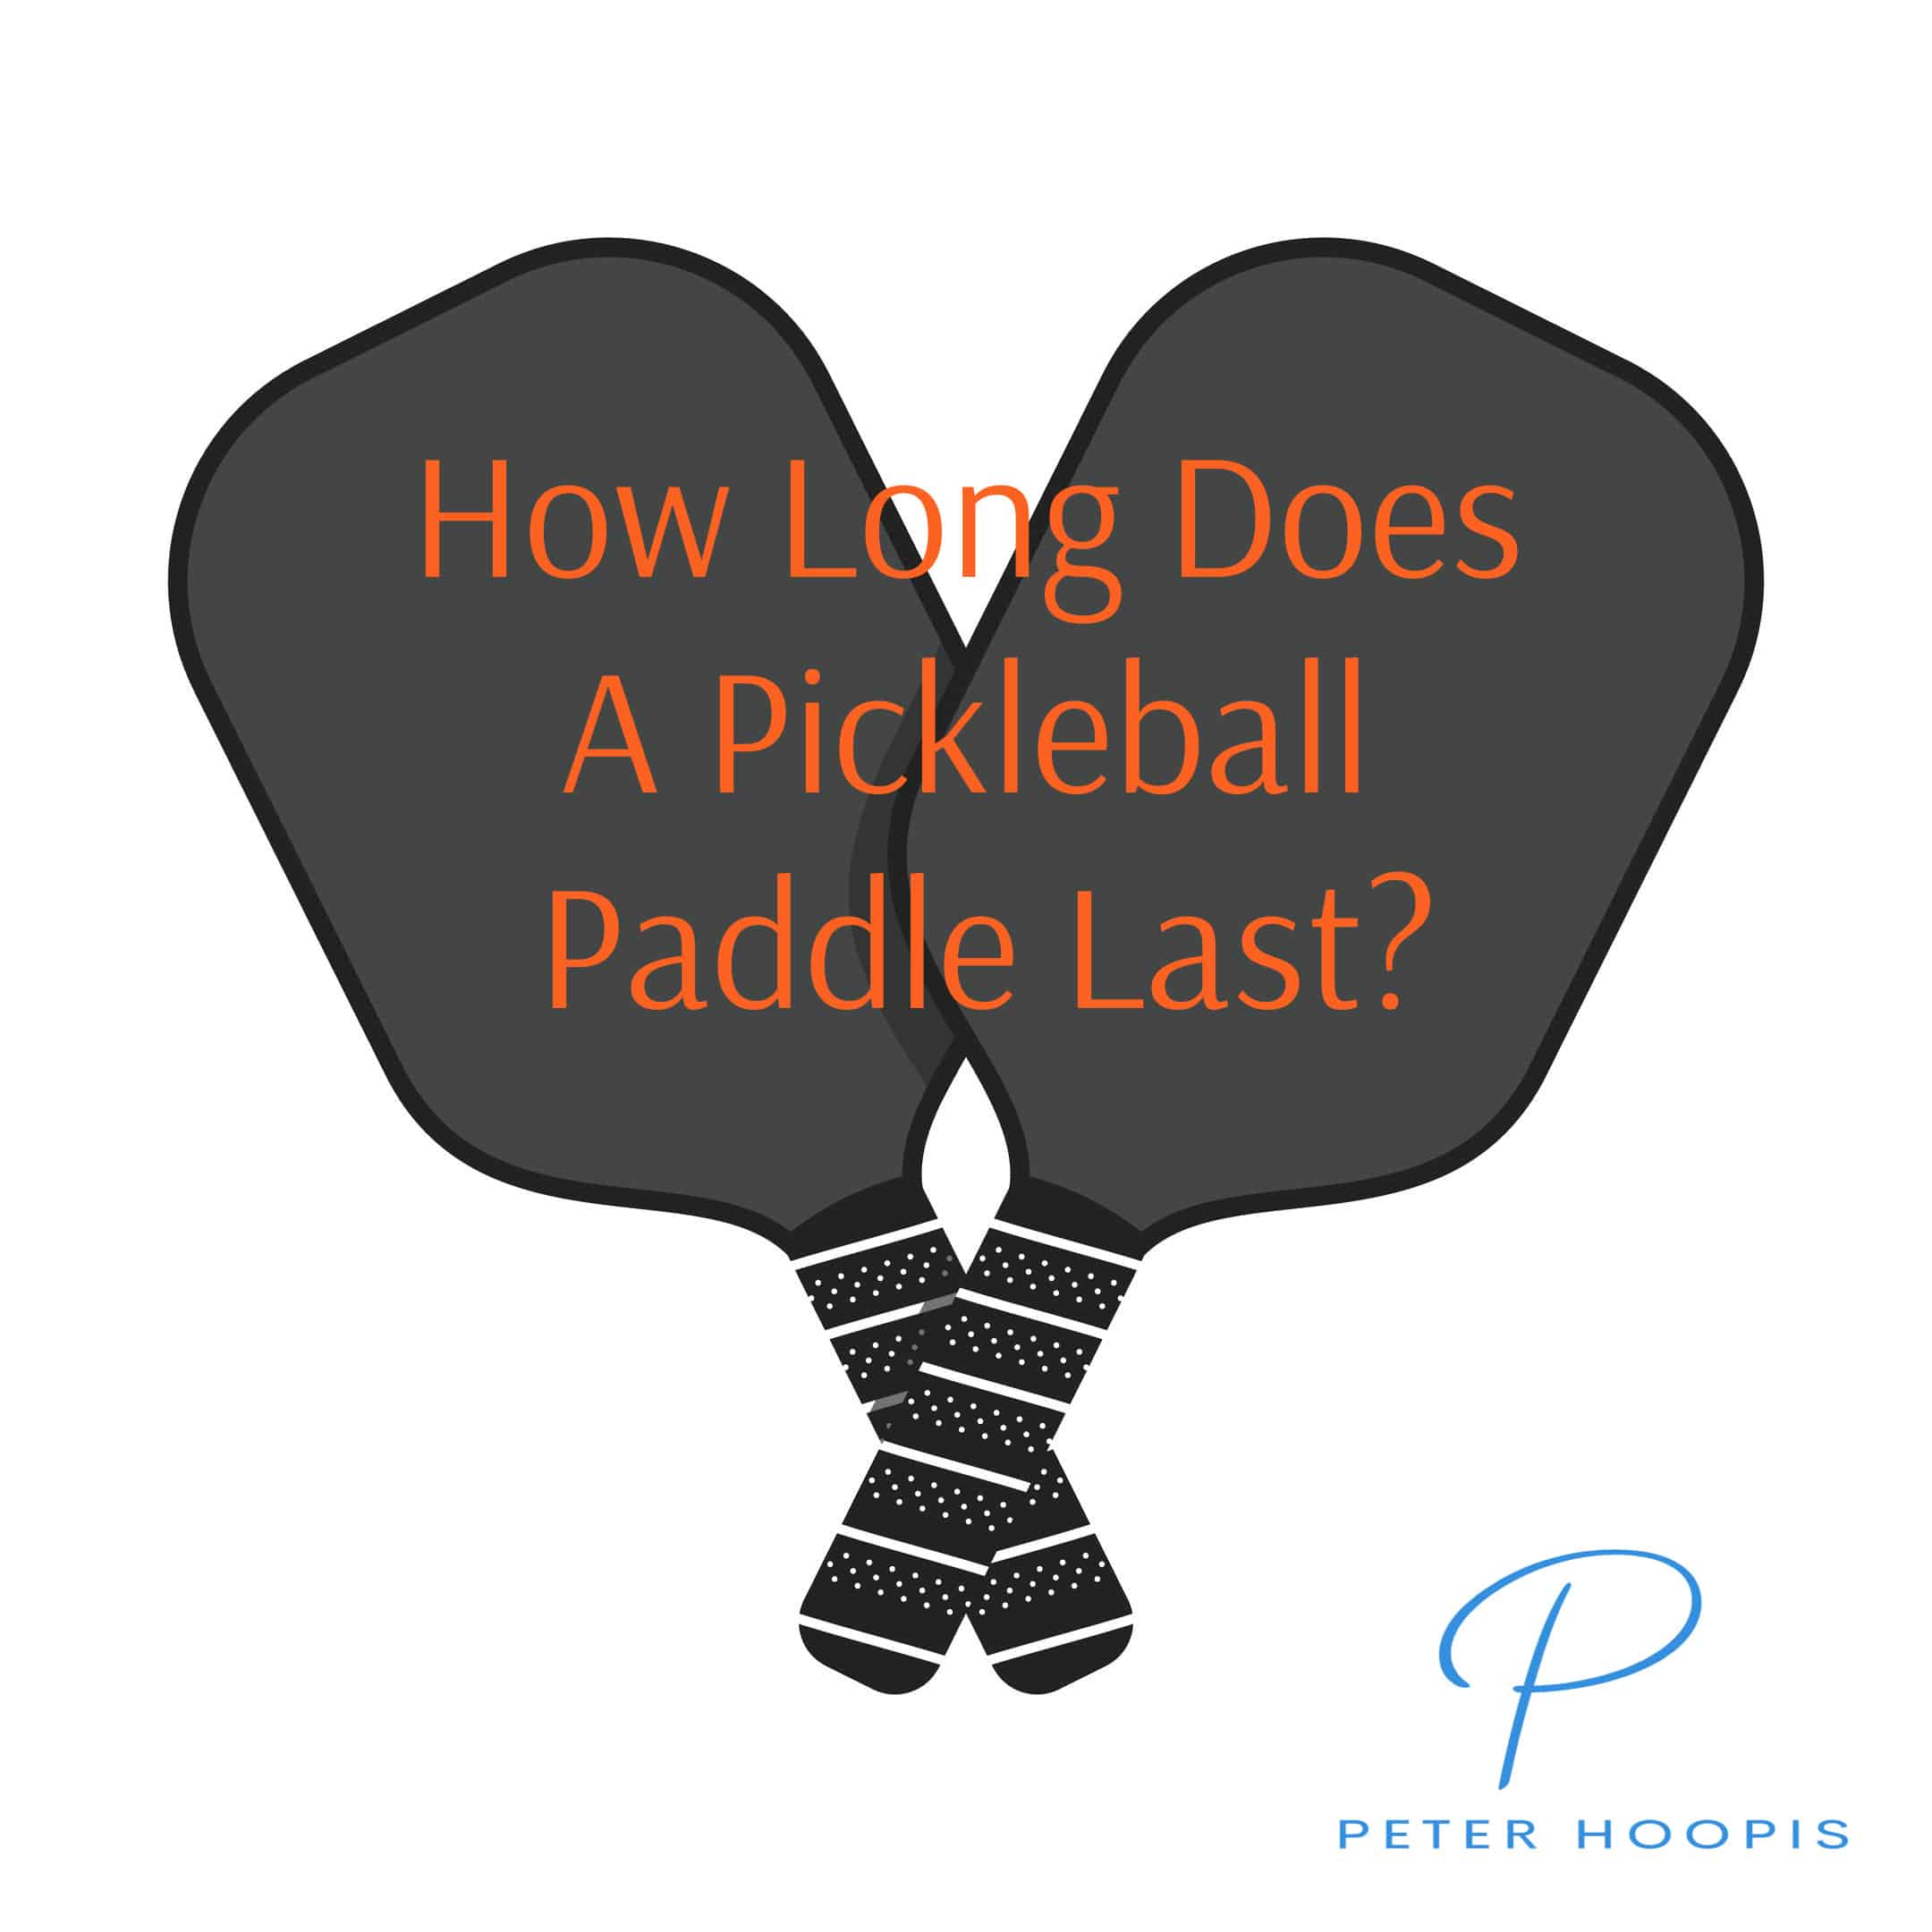 How long does a pickleball paddle last